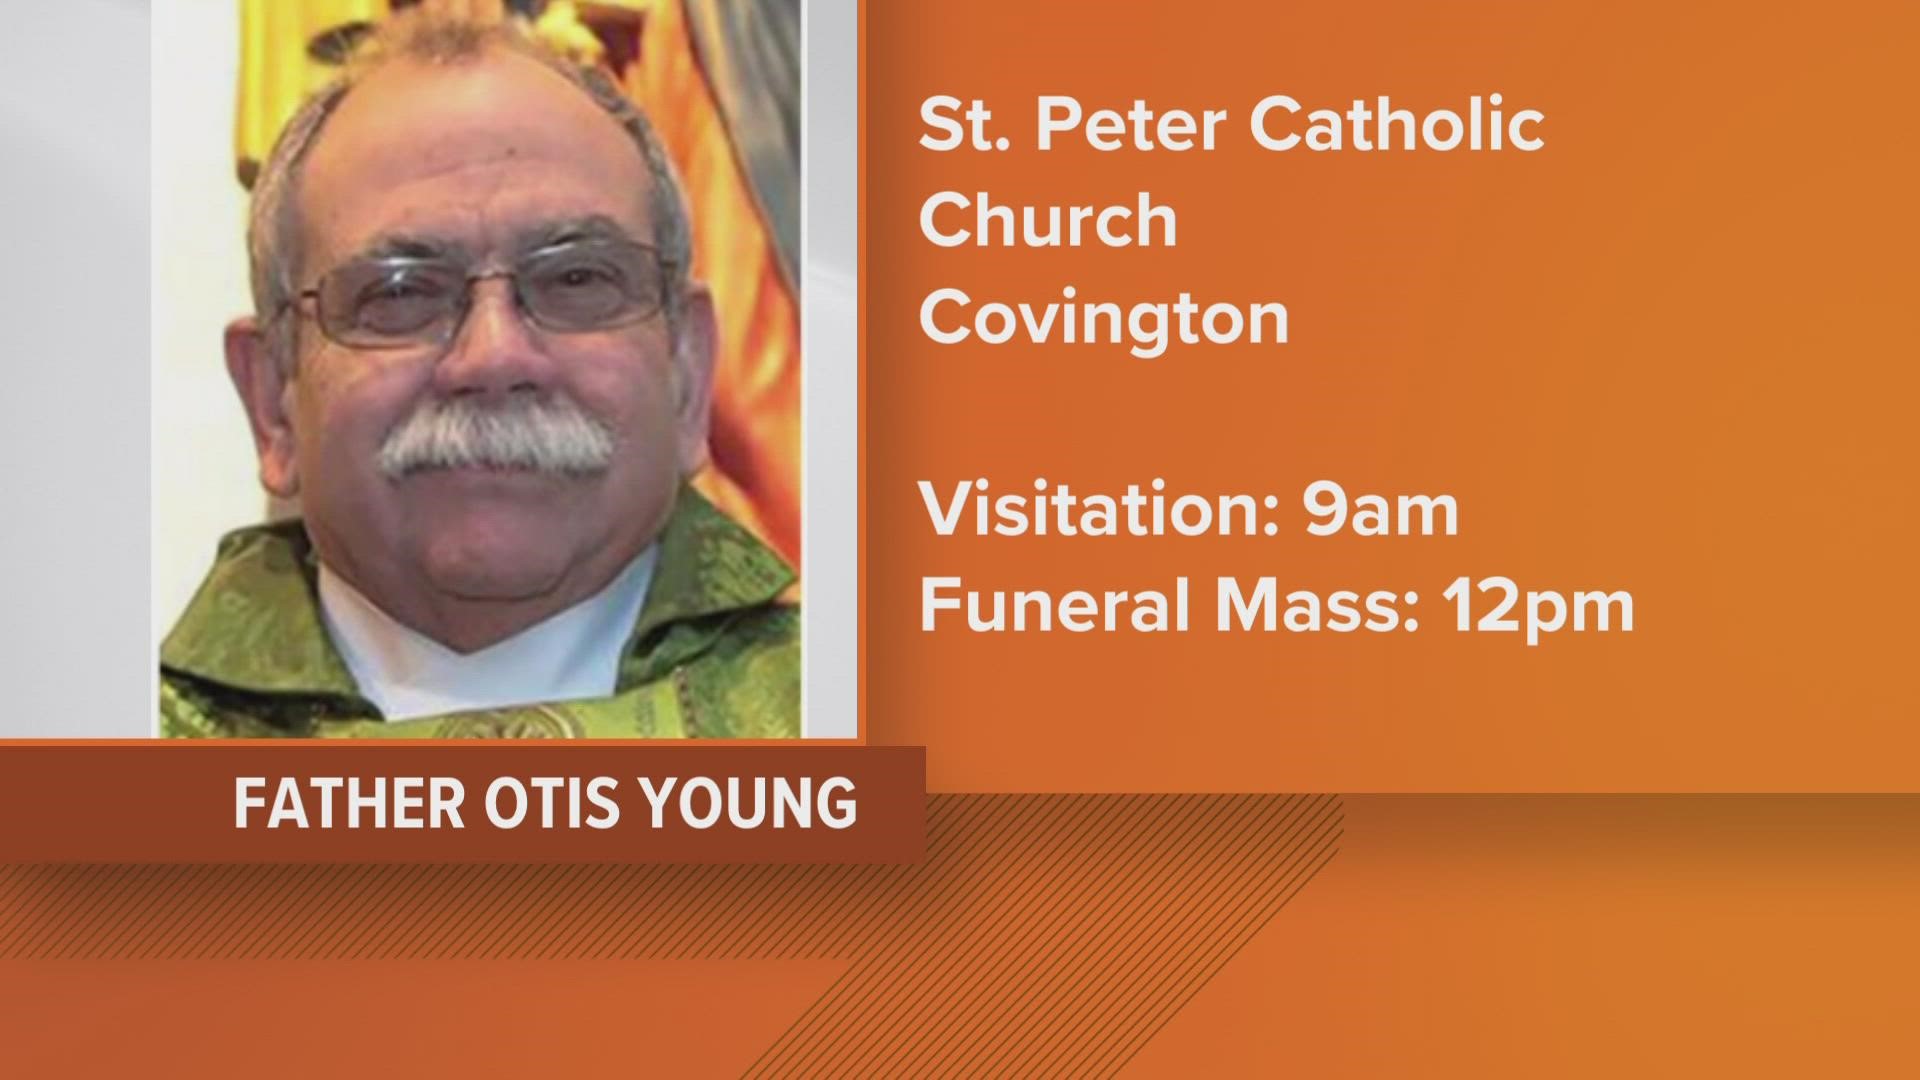 Funeral mass to be held for Father Otis Young and Ruth Prats